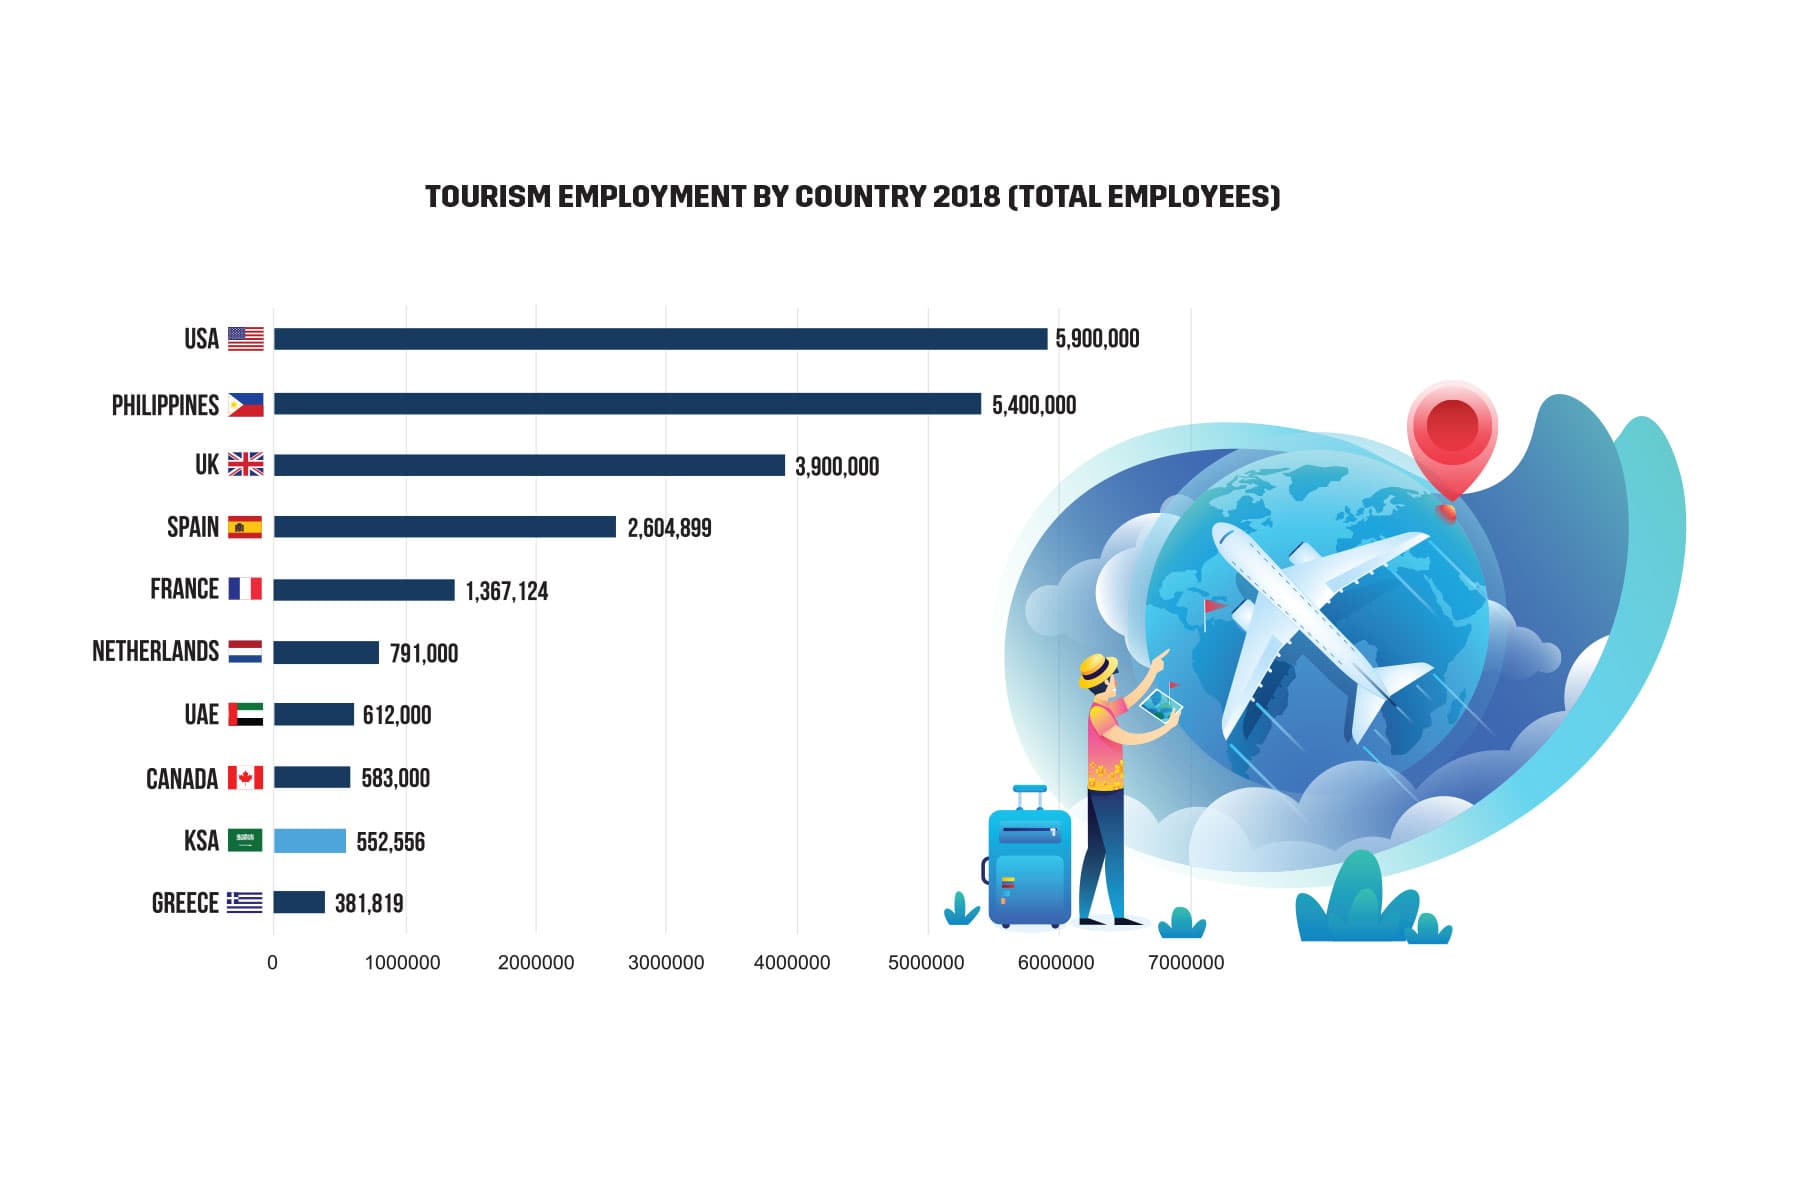 Tourism Employment by Country 2018 (Total Employees)